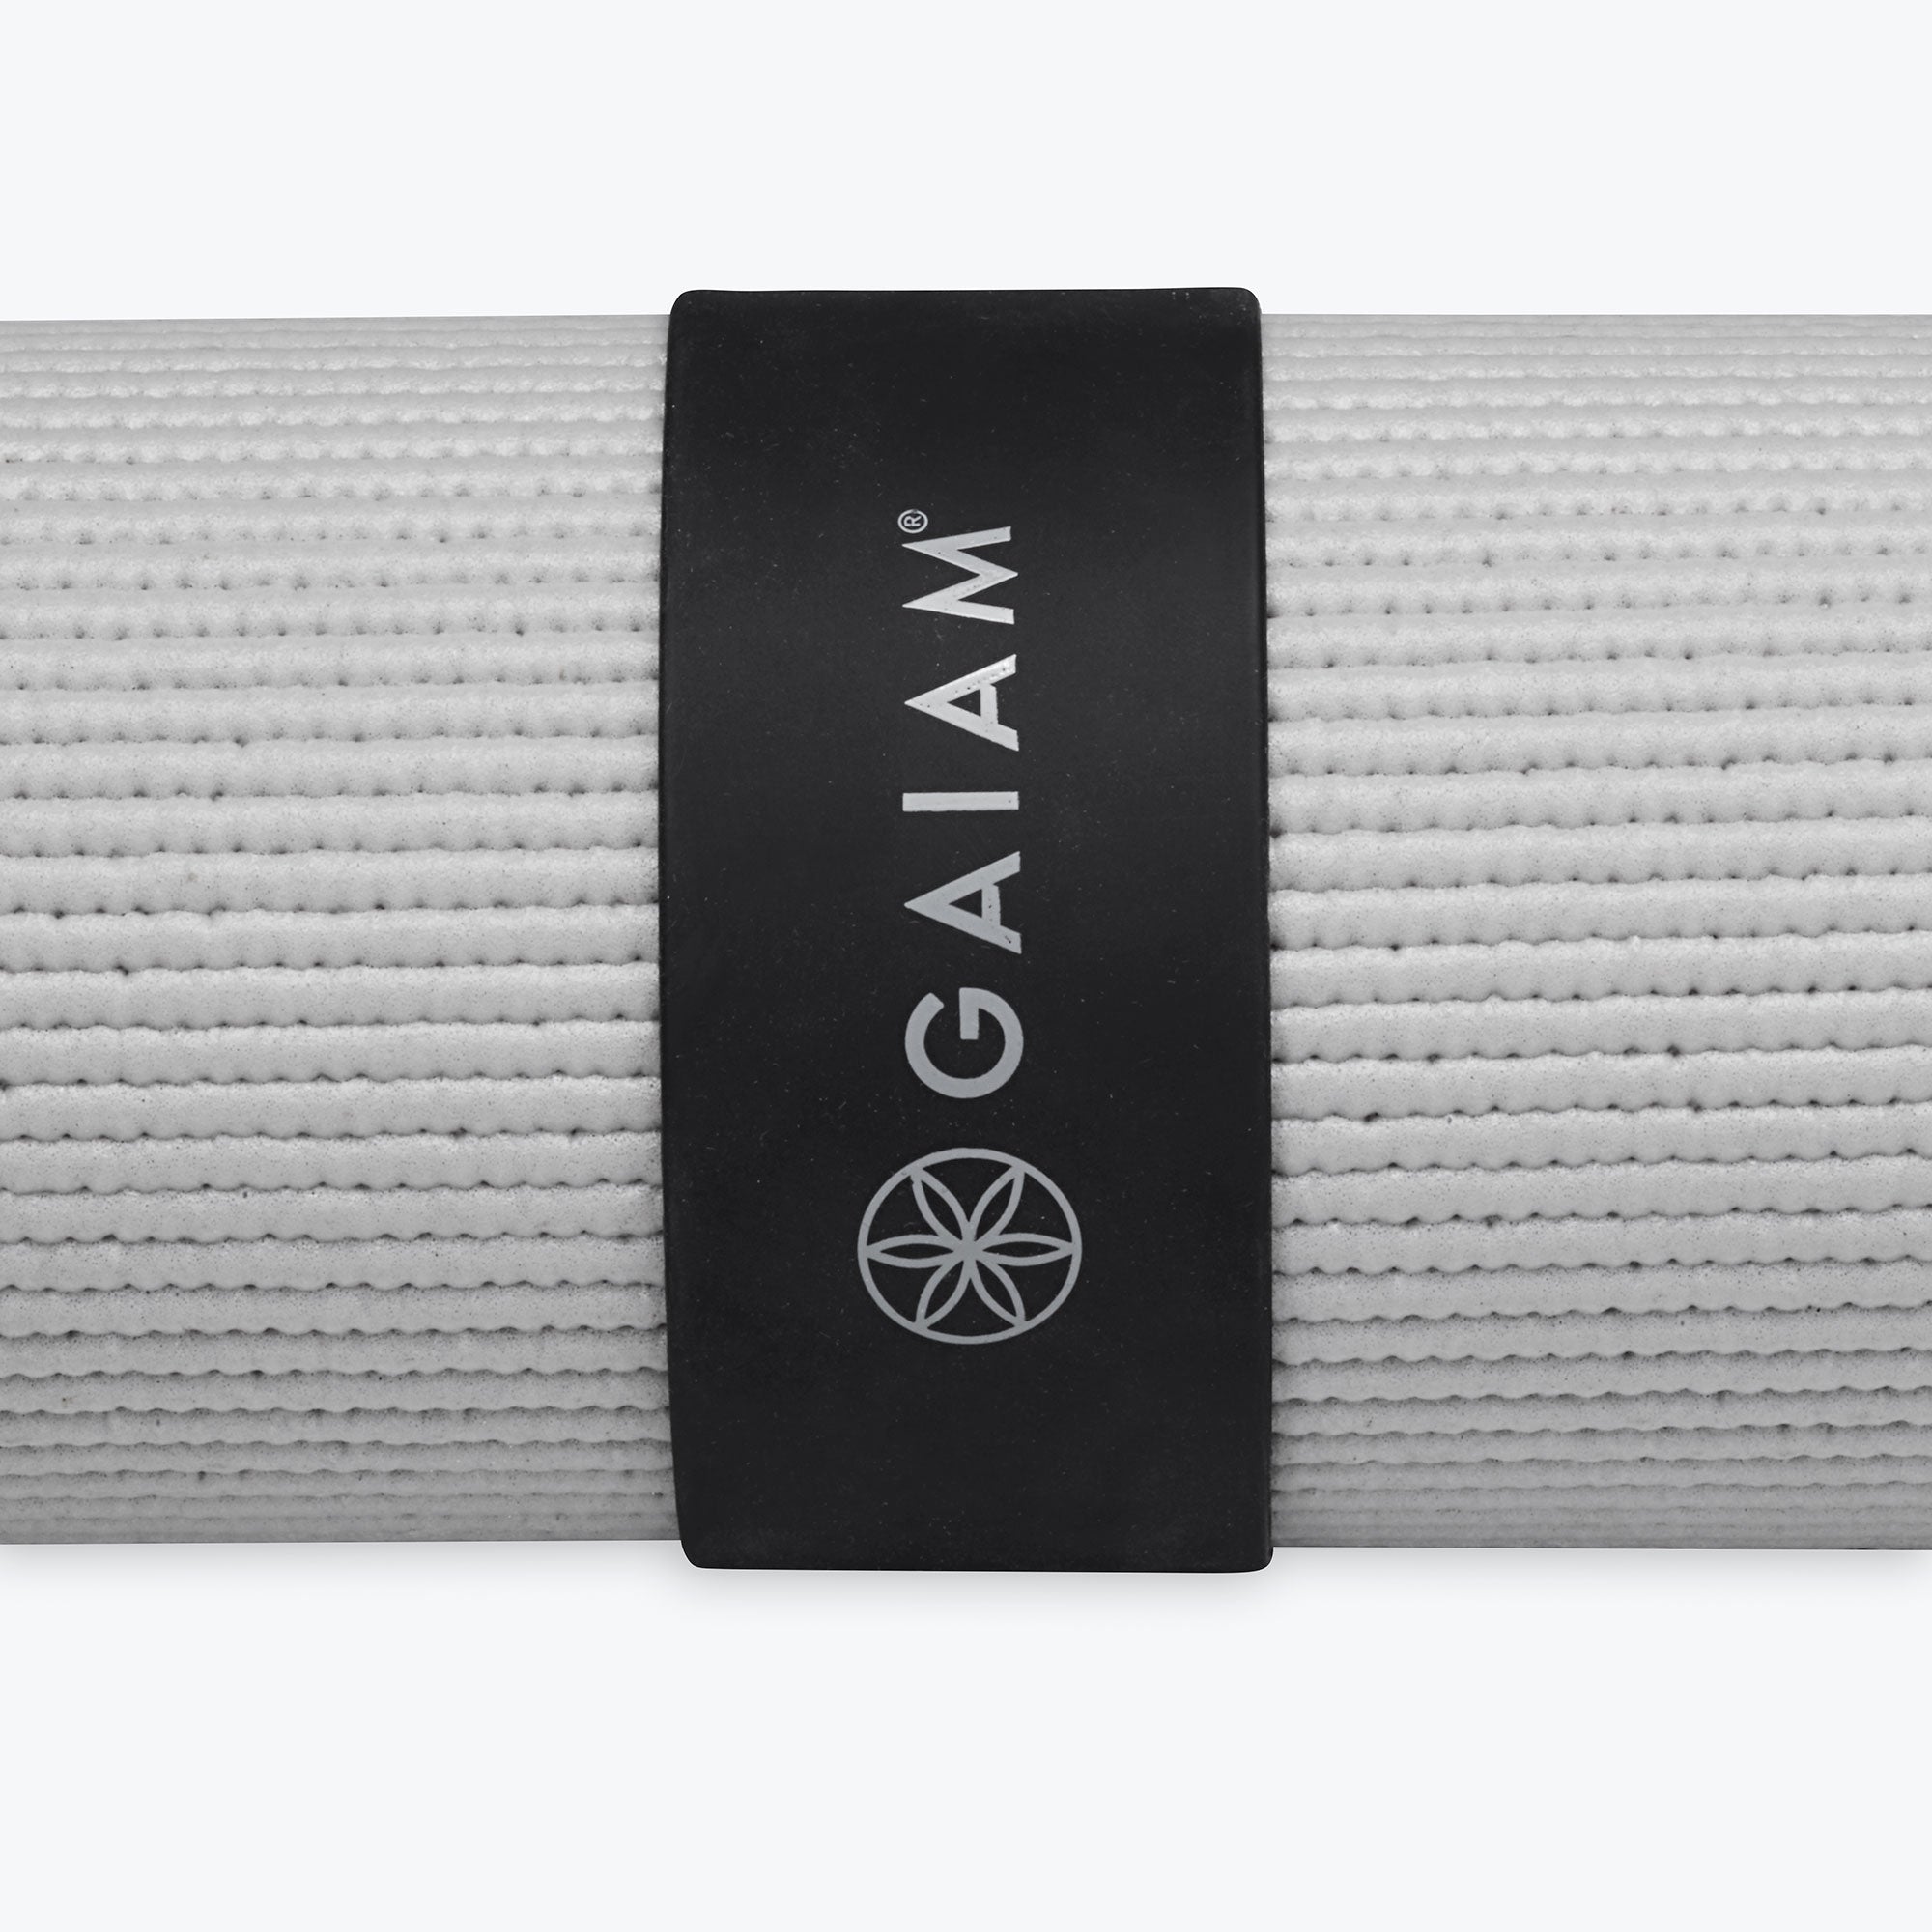 Evolve by Gaiam 8 Ft. Yoga Strap NEW Black With Silver Hardware